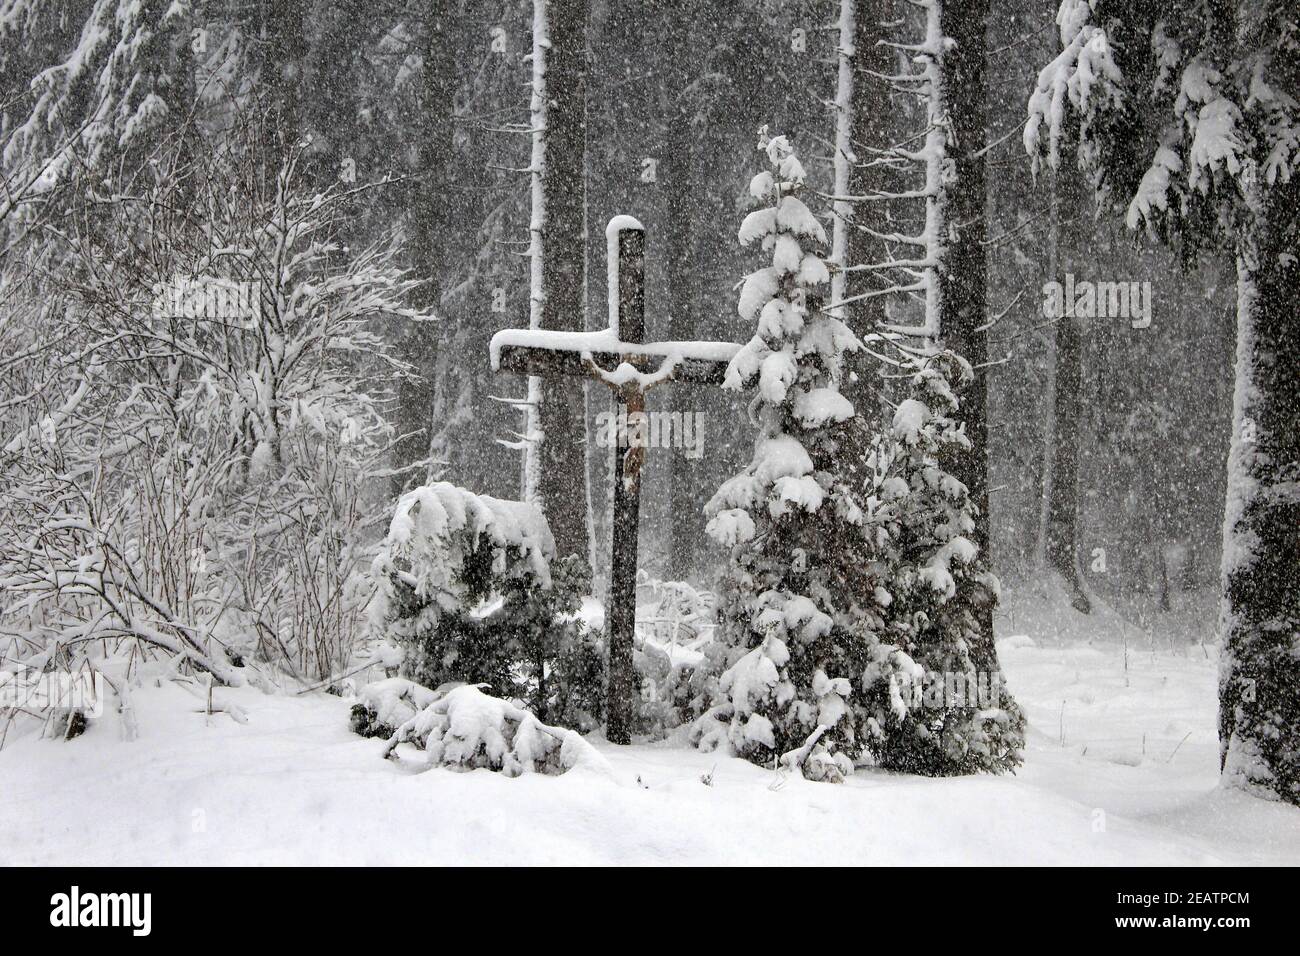 Christian cross and driving snow in winter forest Stock Photo